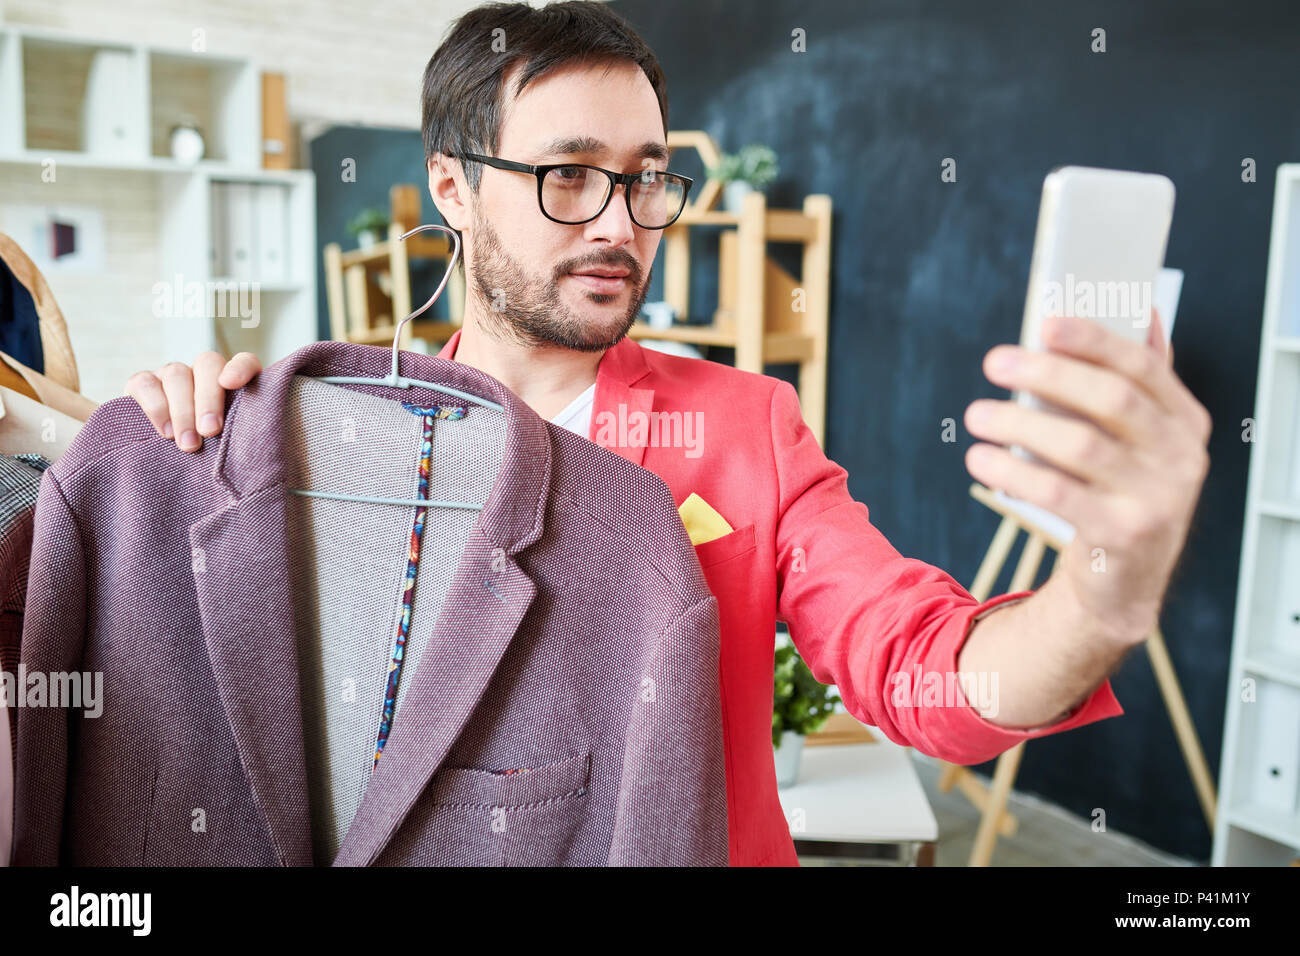 Trendy blogger taking selfie with jacket Stock Photo